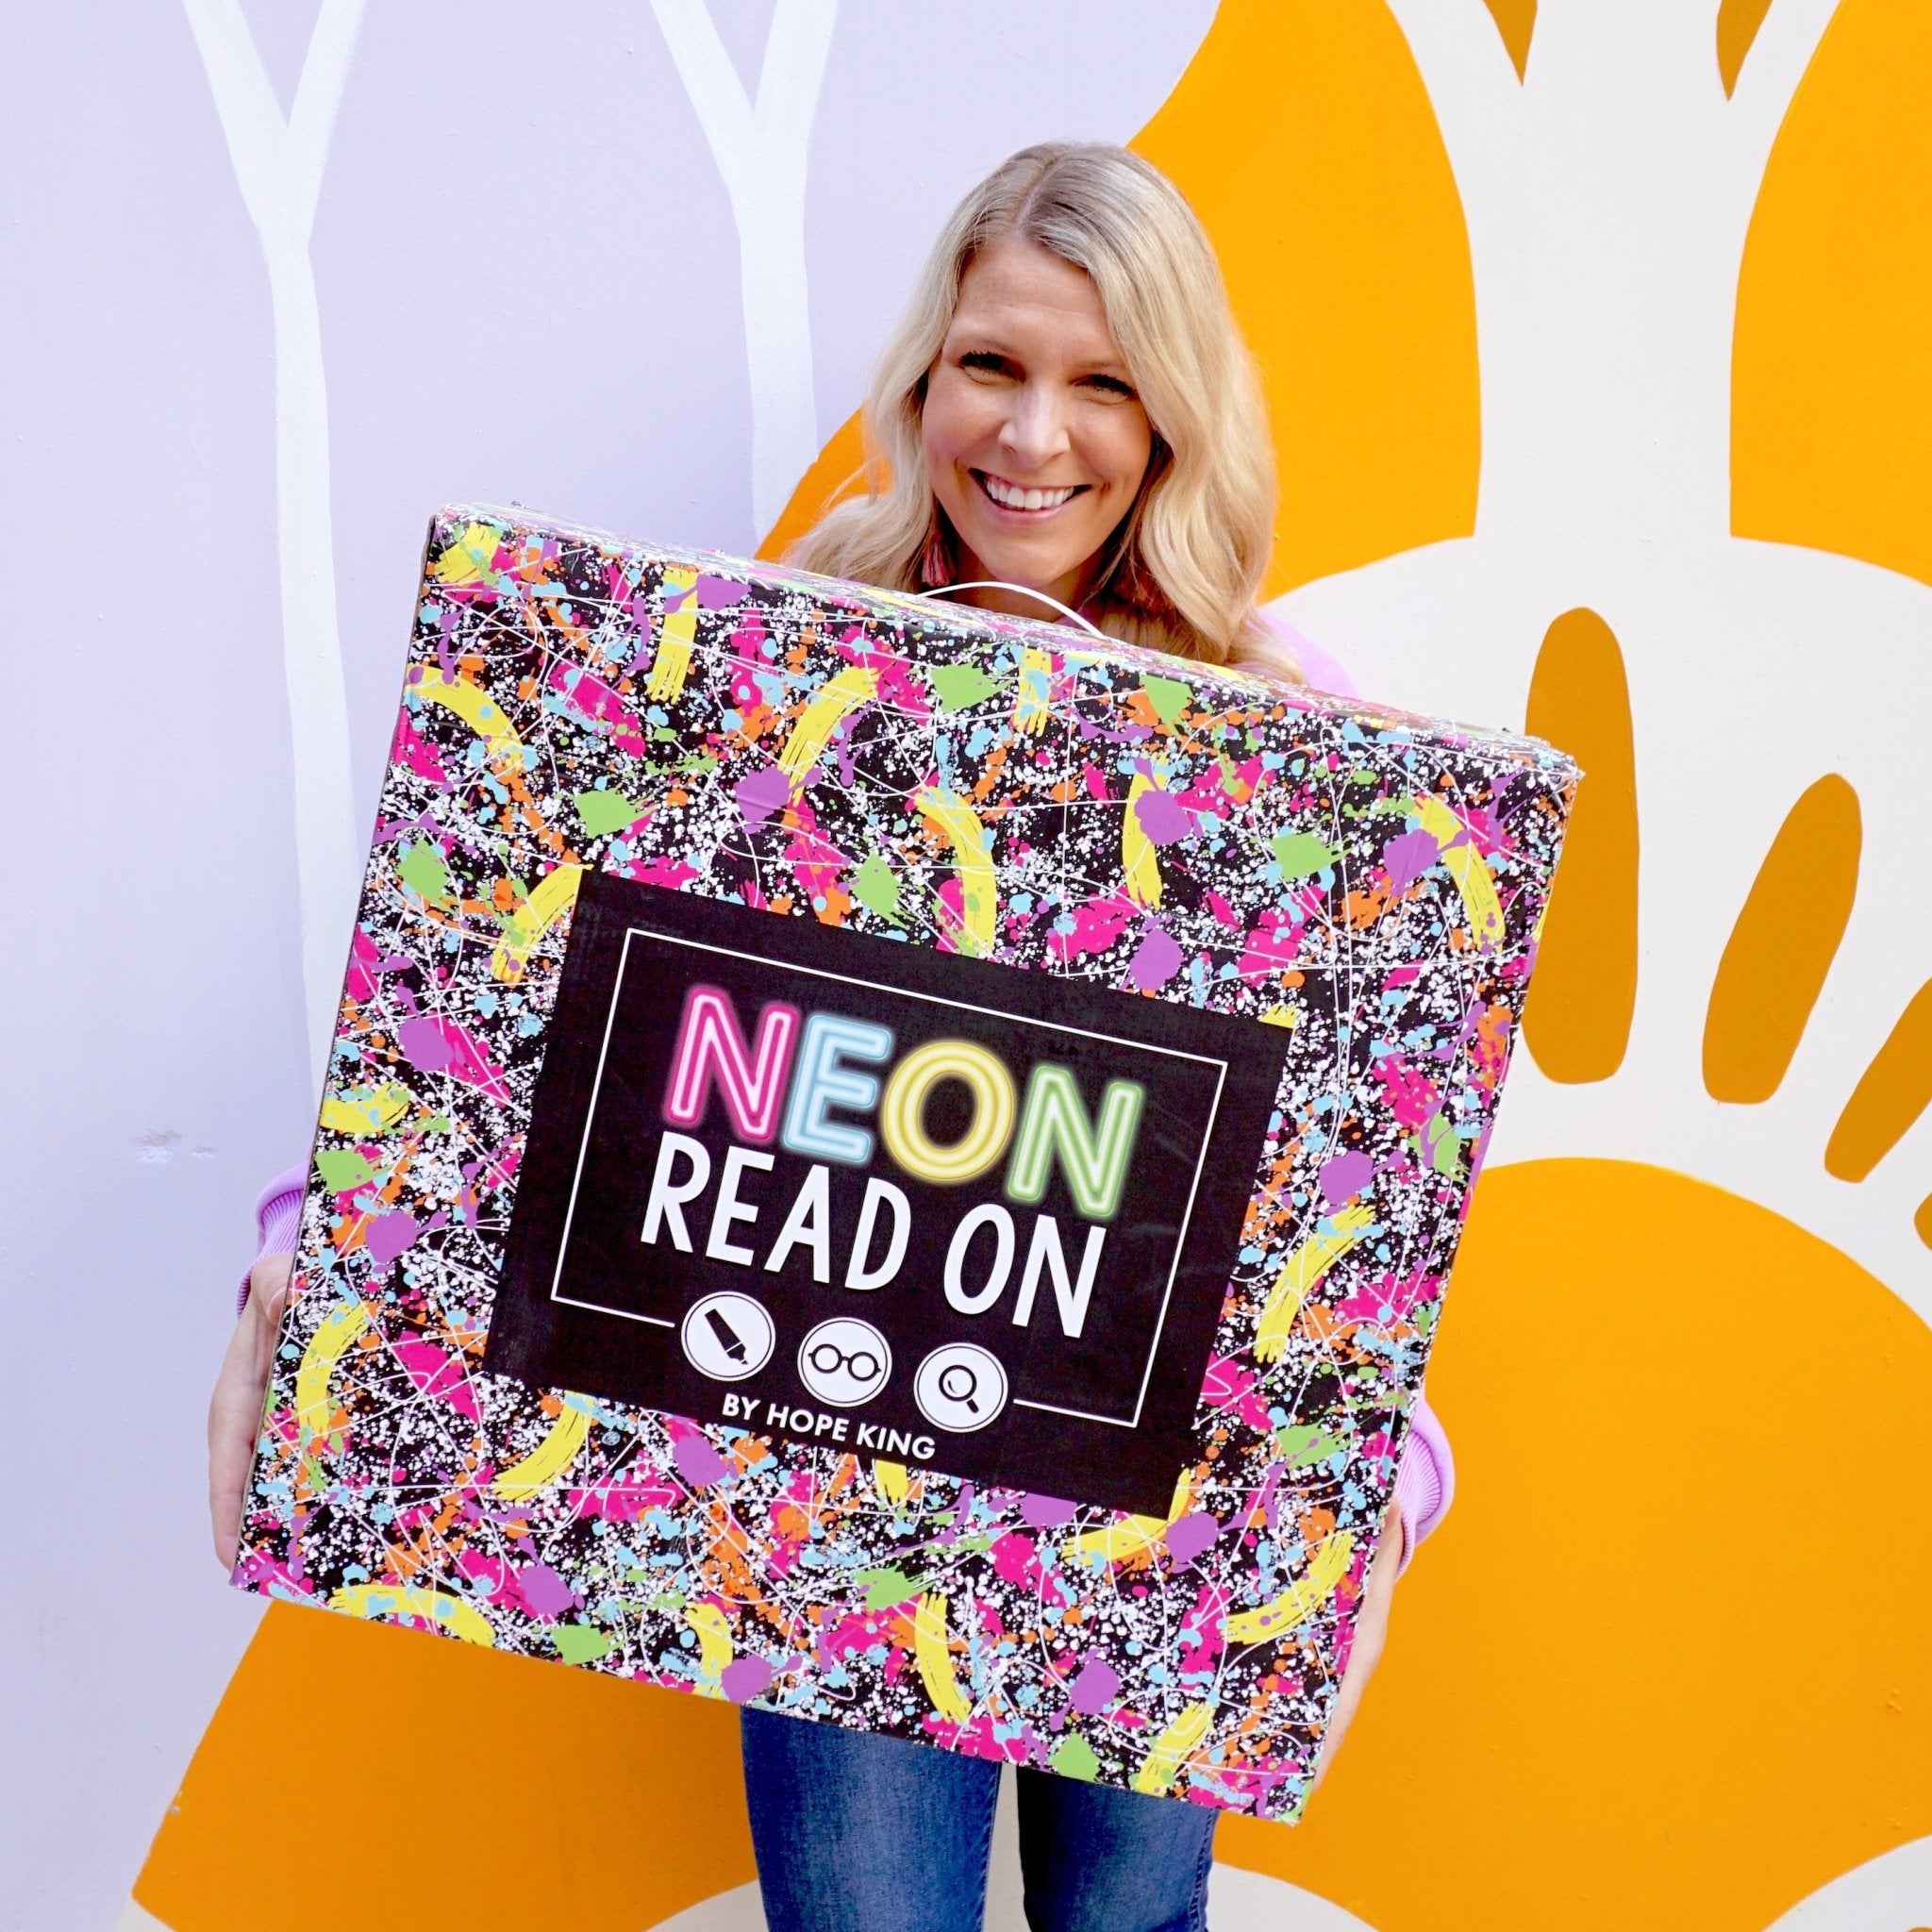 Neon Read On FREE Resource & Video